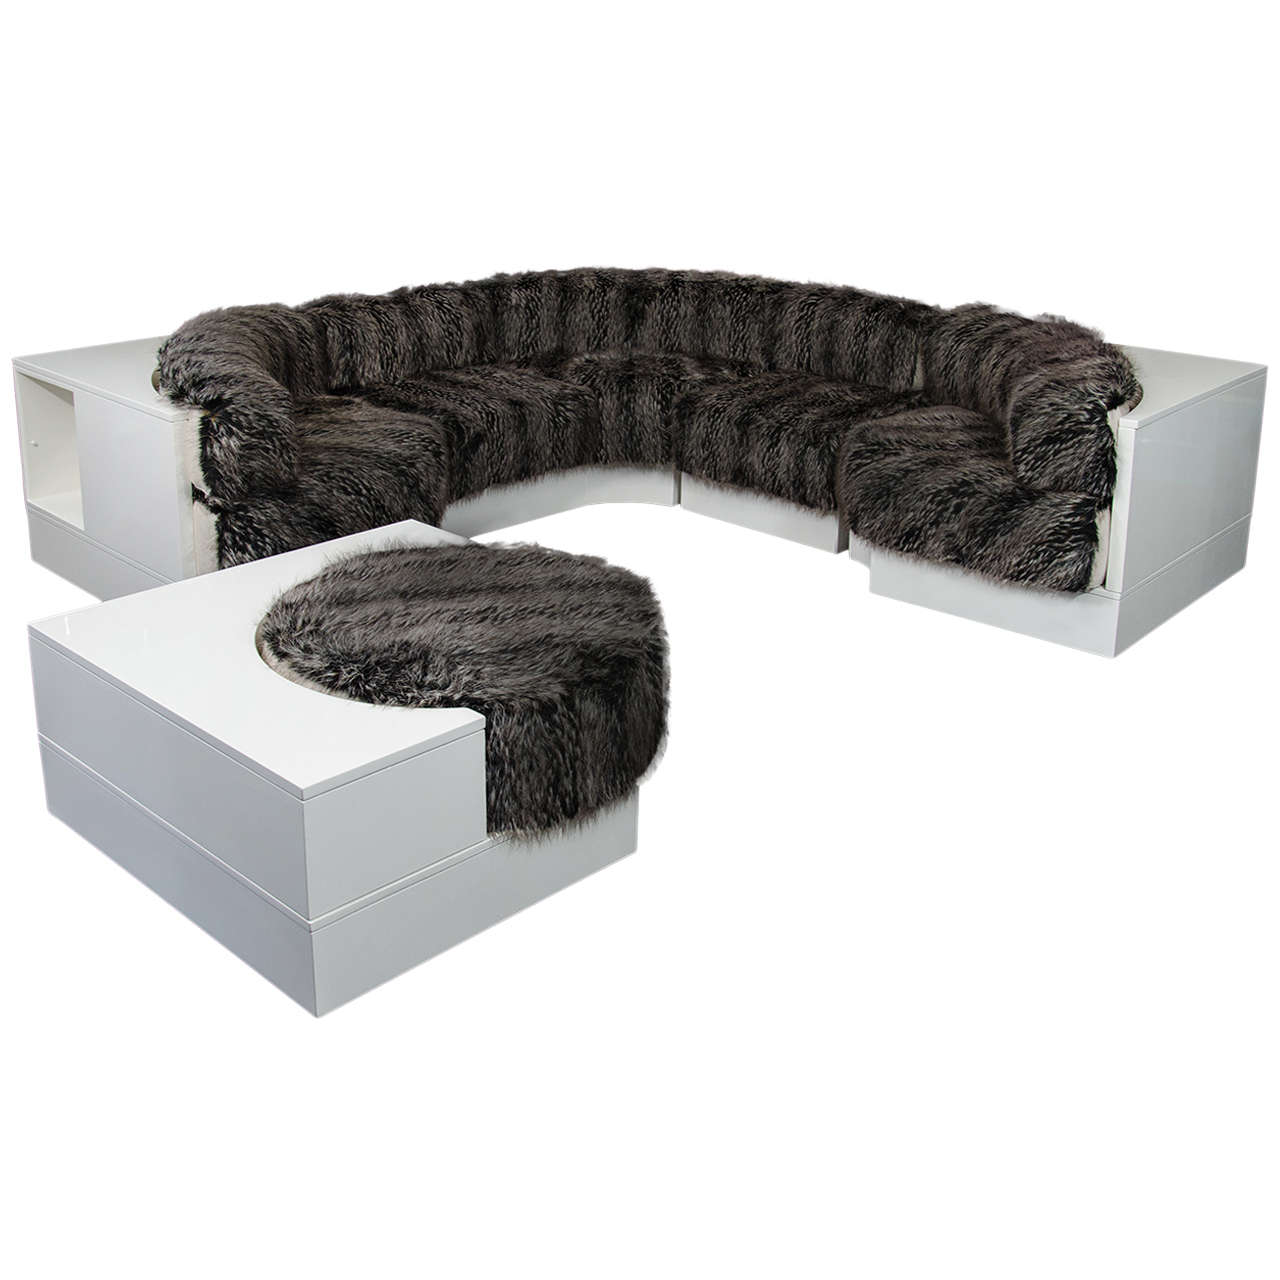 Party Sofa covered in Faux Fur